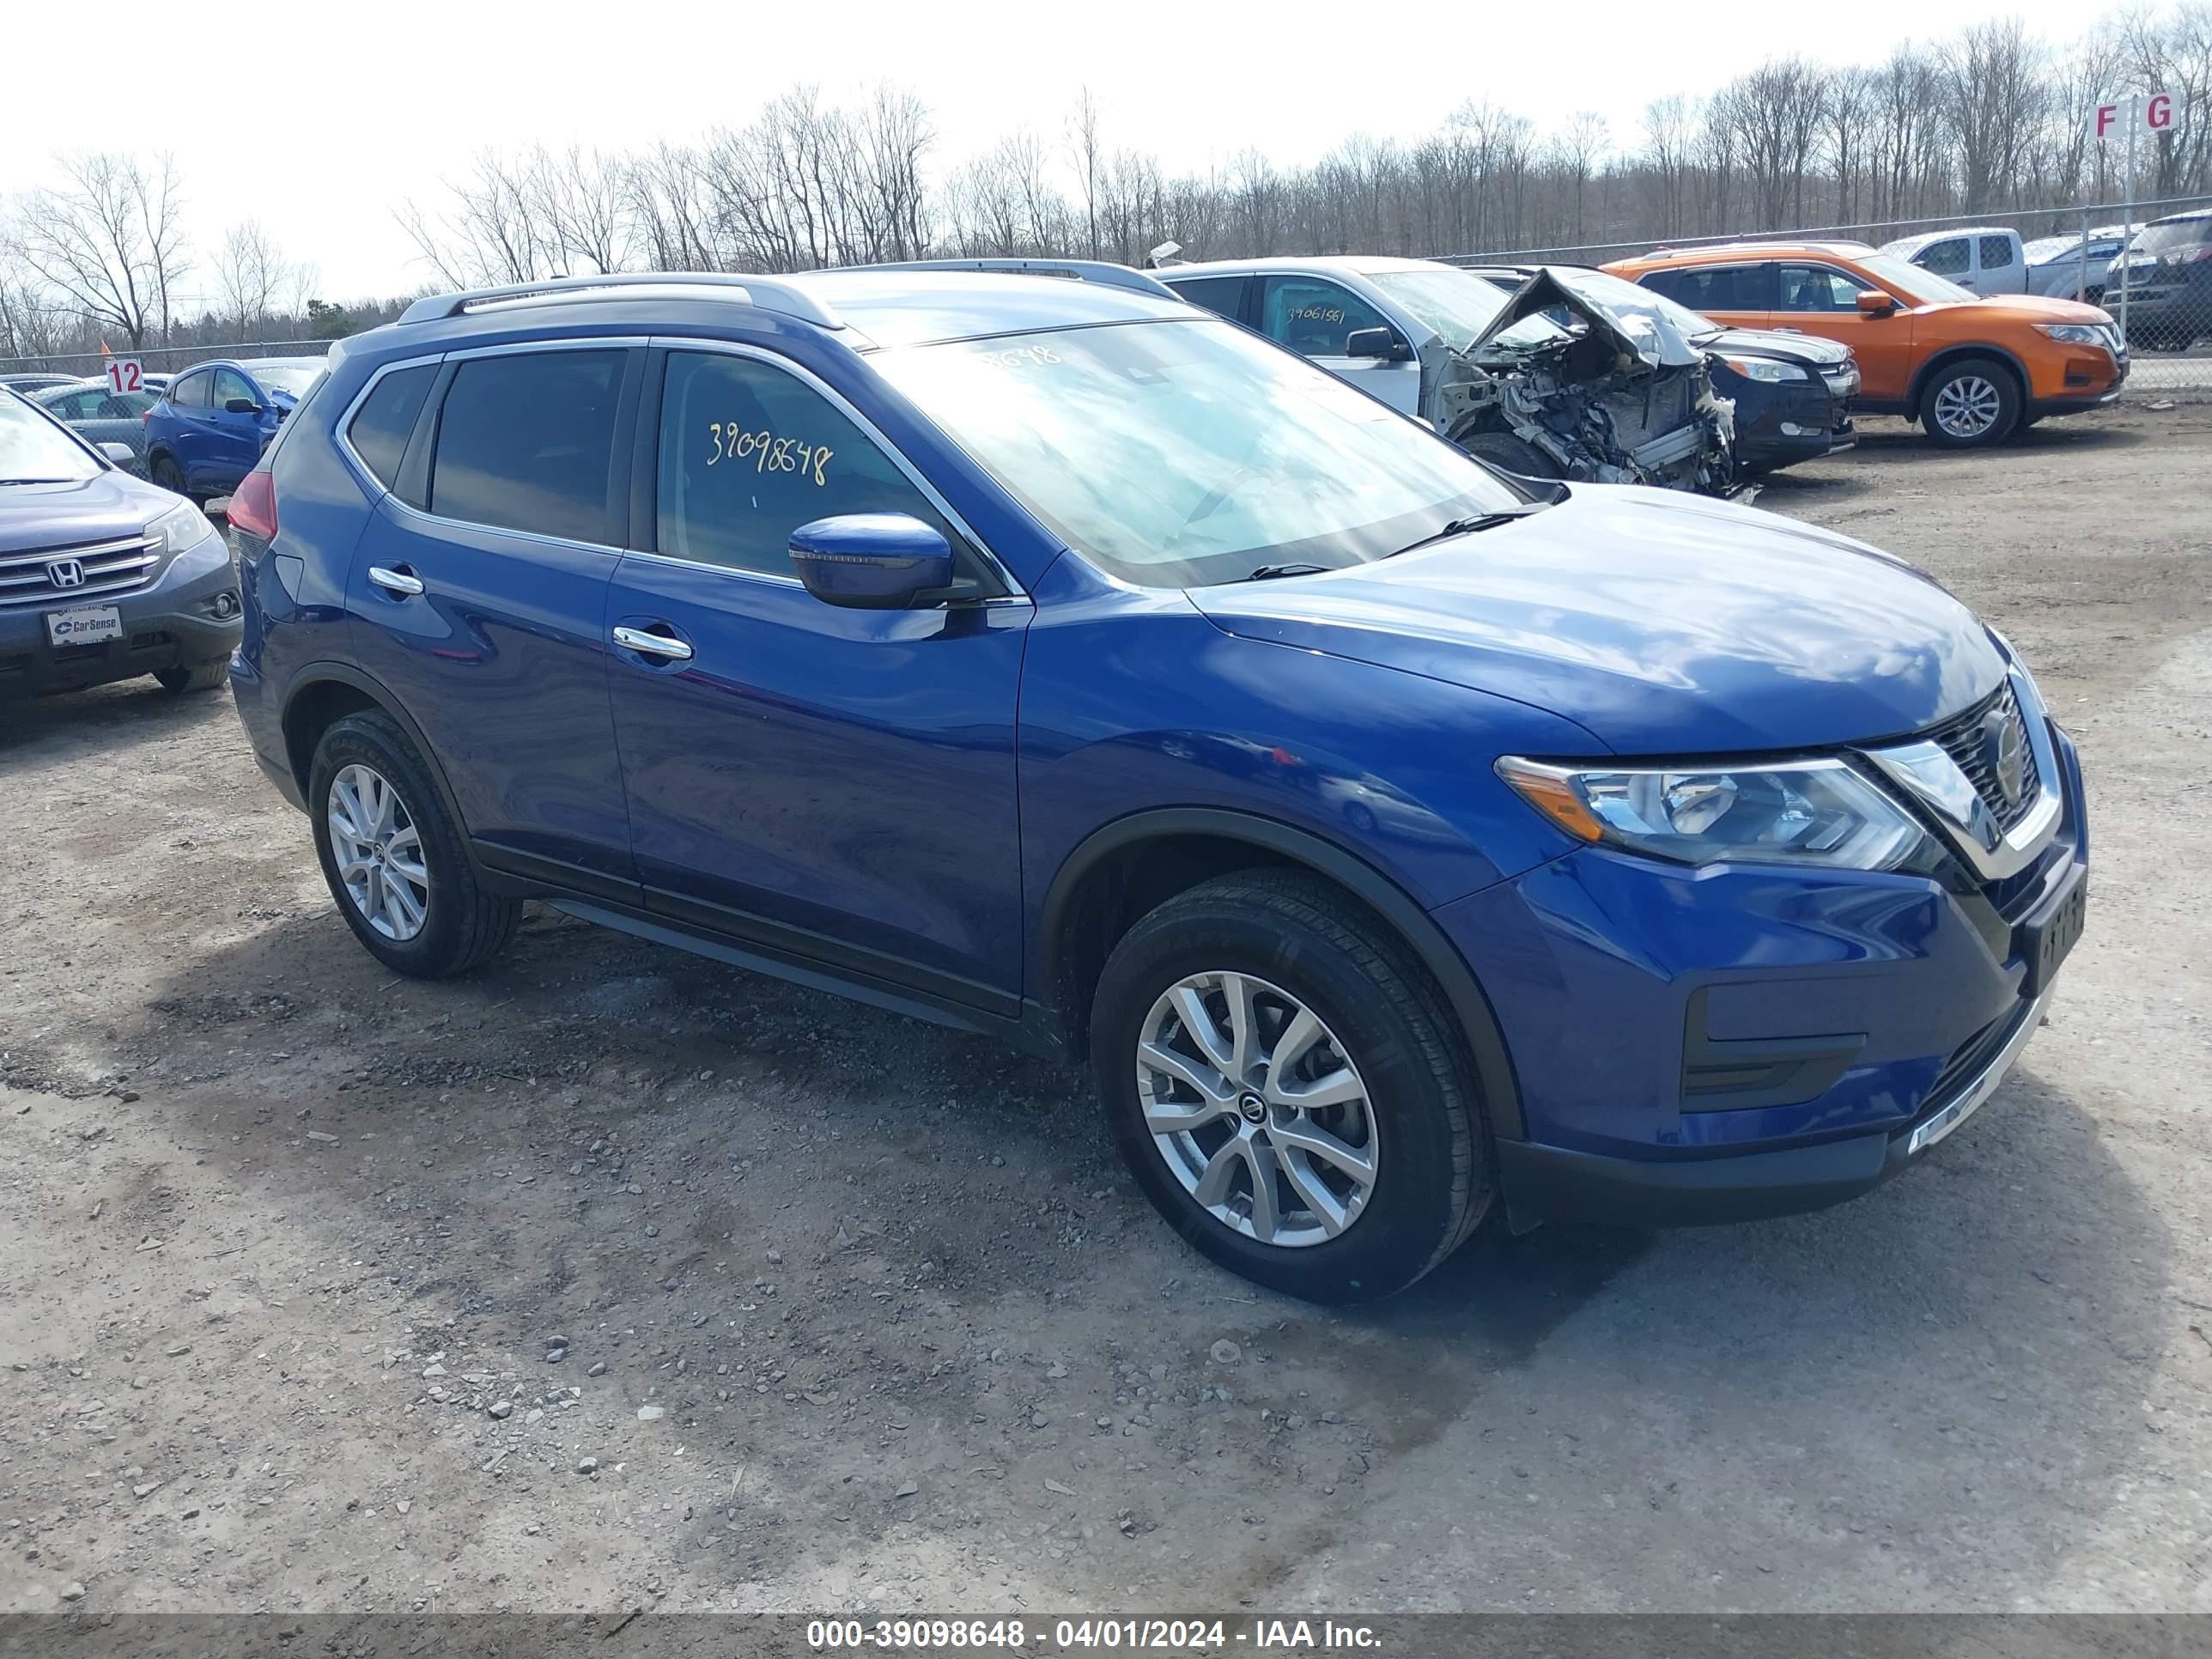 vin: JN8AT2MV8LW131227 JN8AT2MV8LW131227 2020 nissan rogue 2500 for Sale in 14416, 7149 Appletree Ave., Bergen, New York, USA